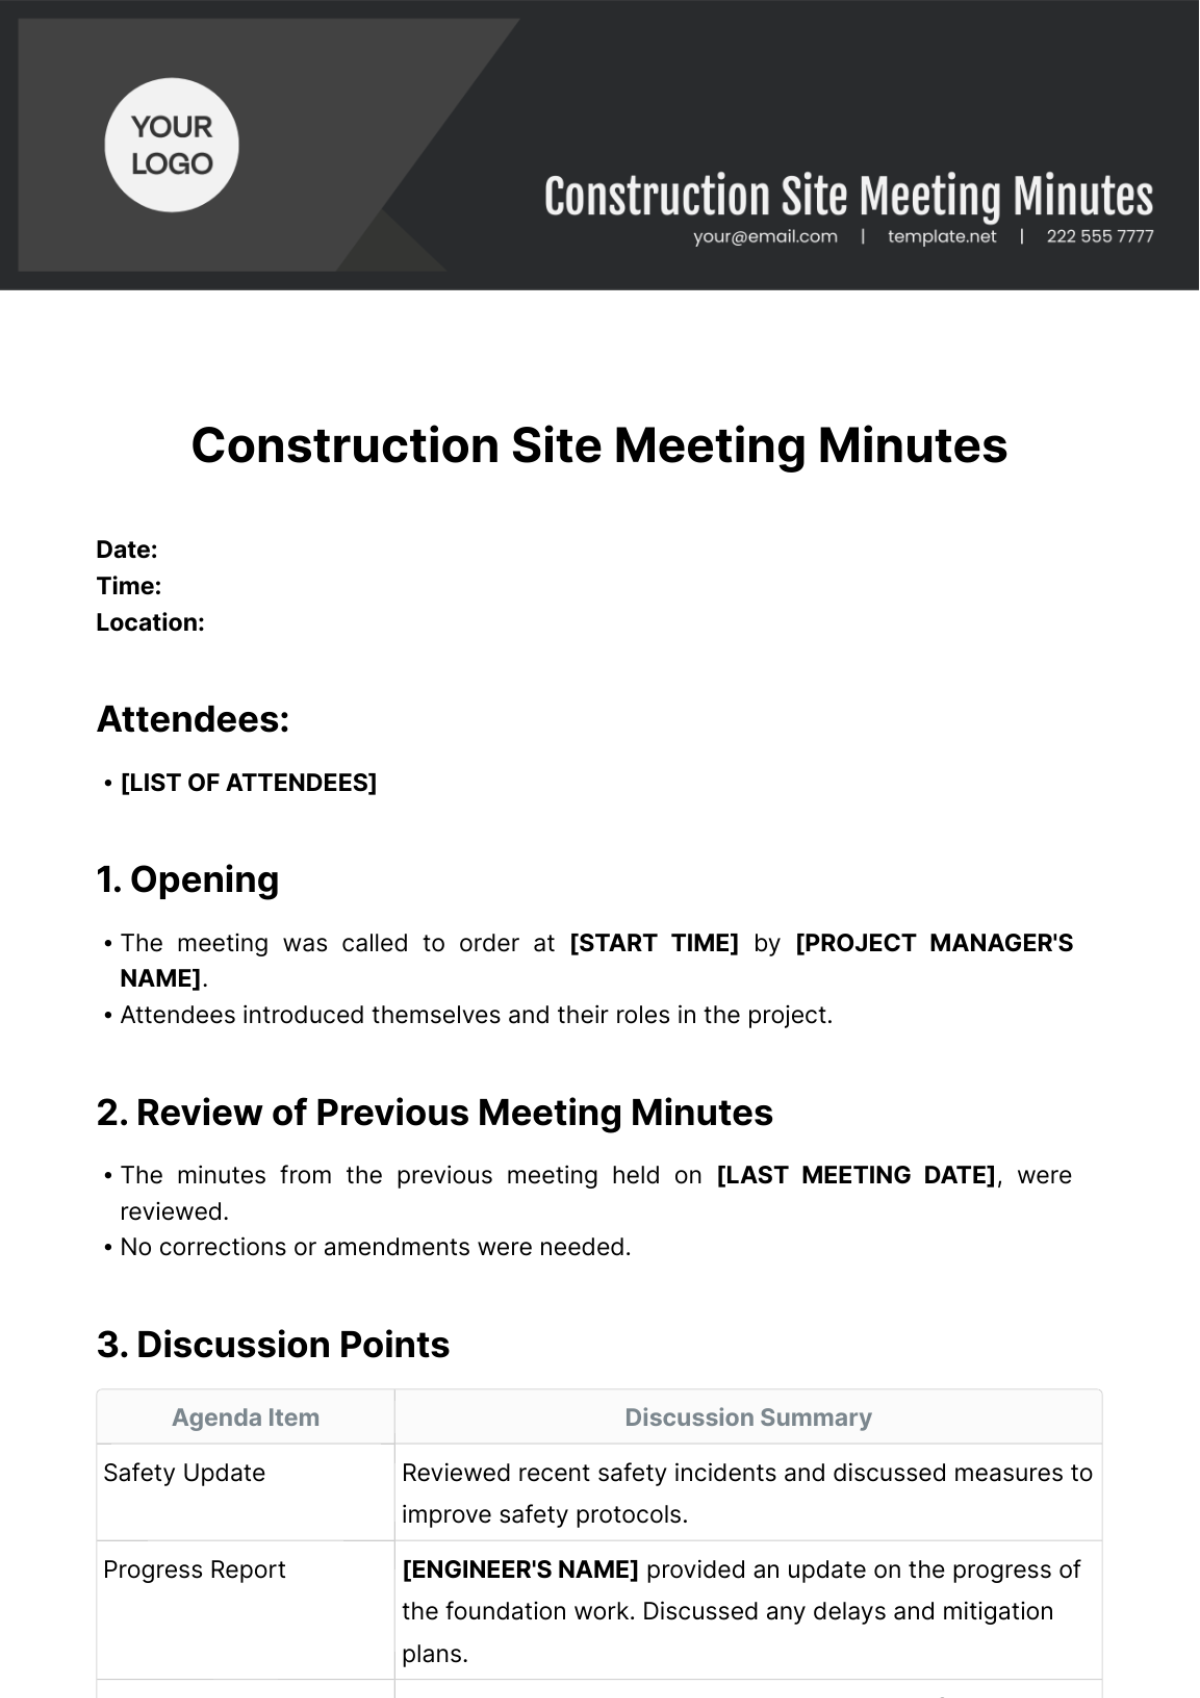 Construction Site Meeting Minutes Template